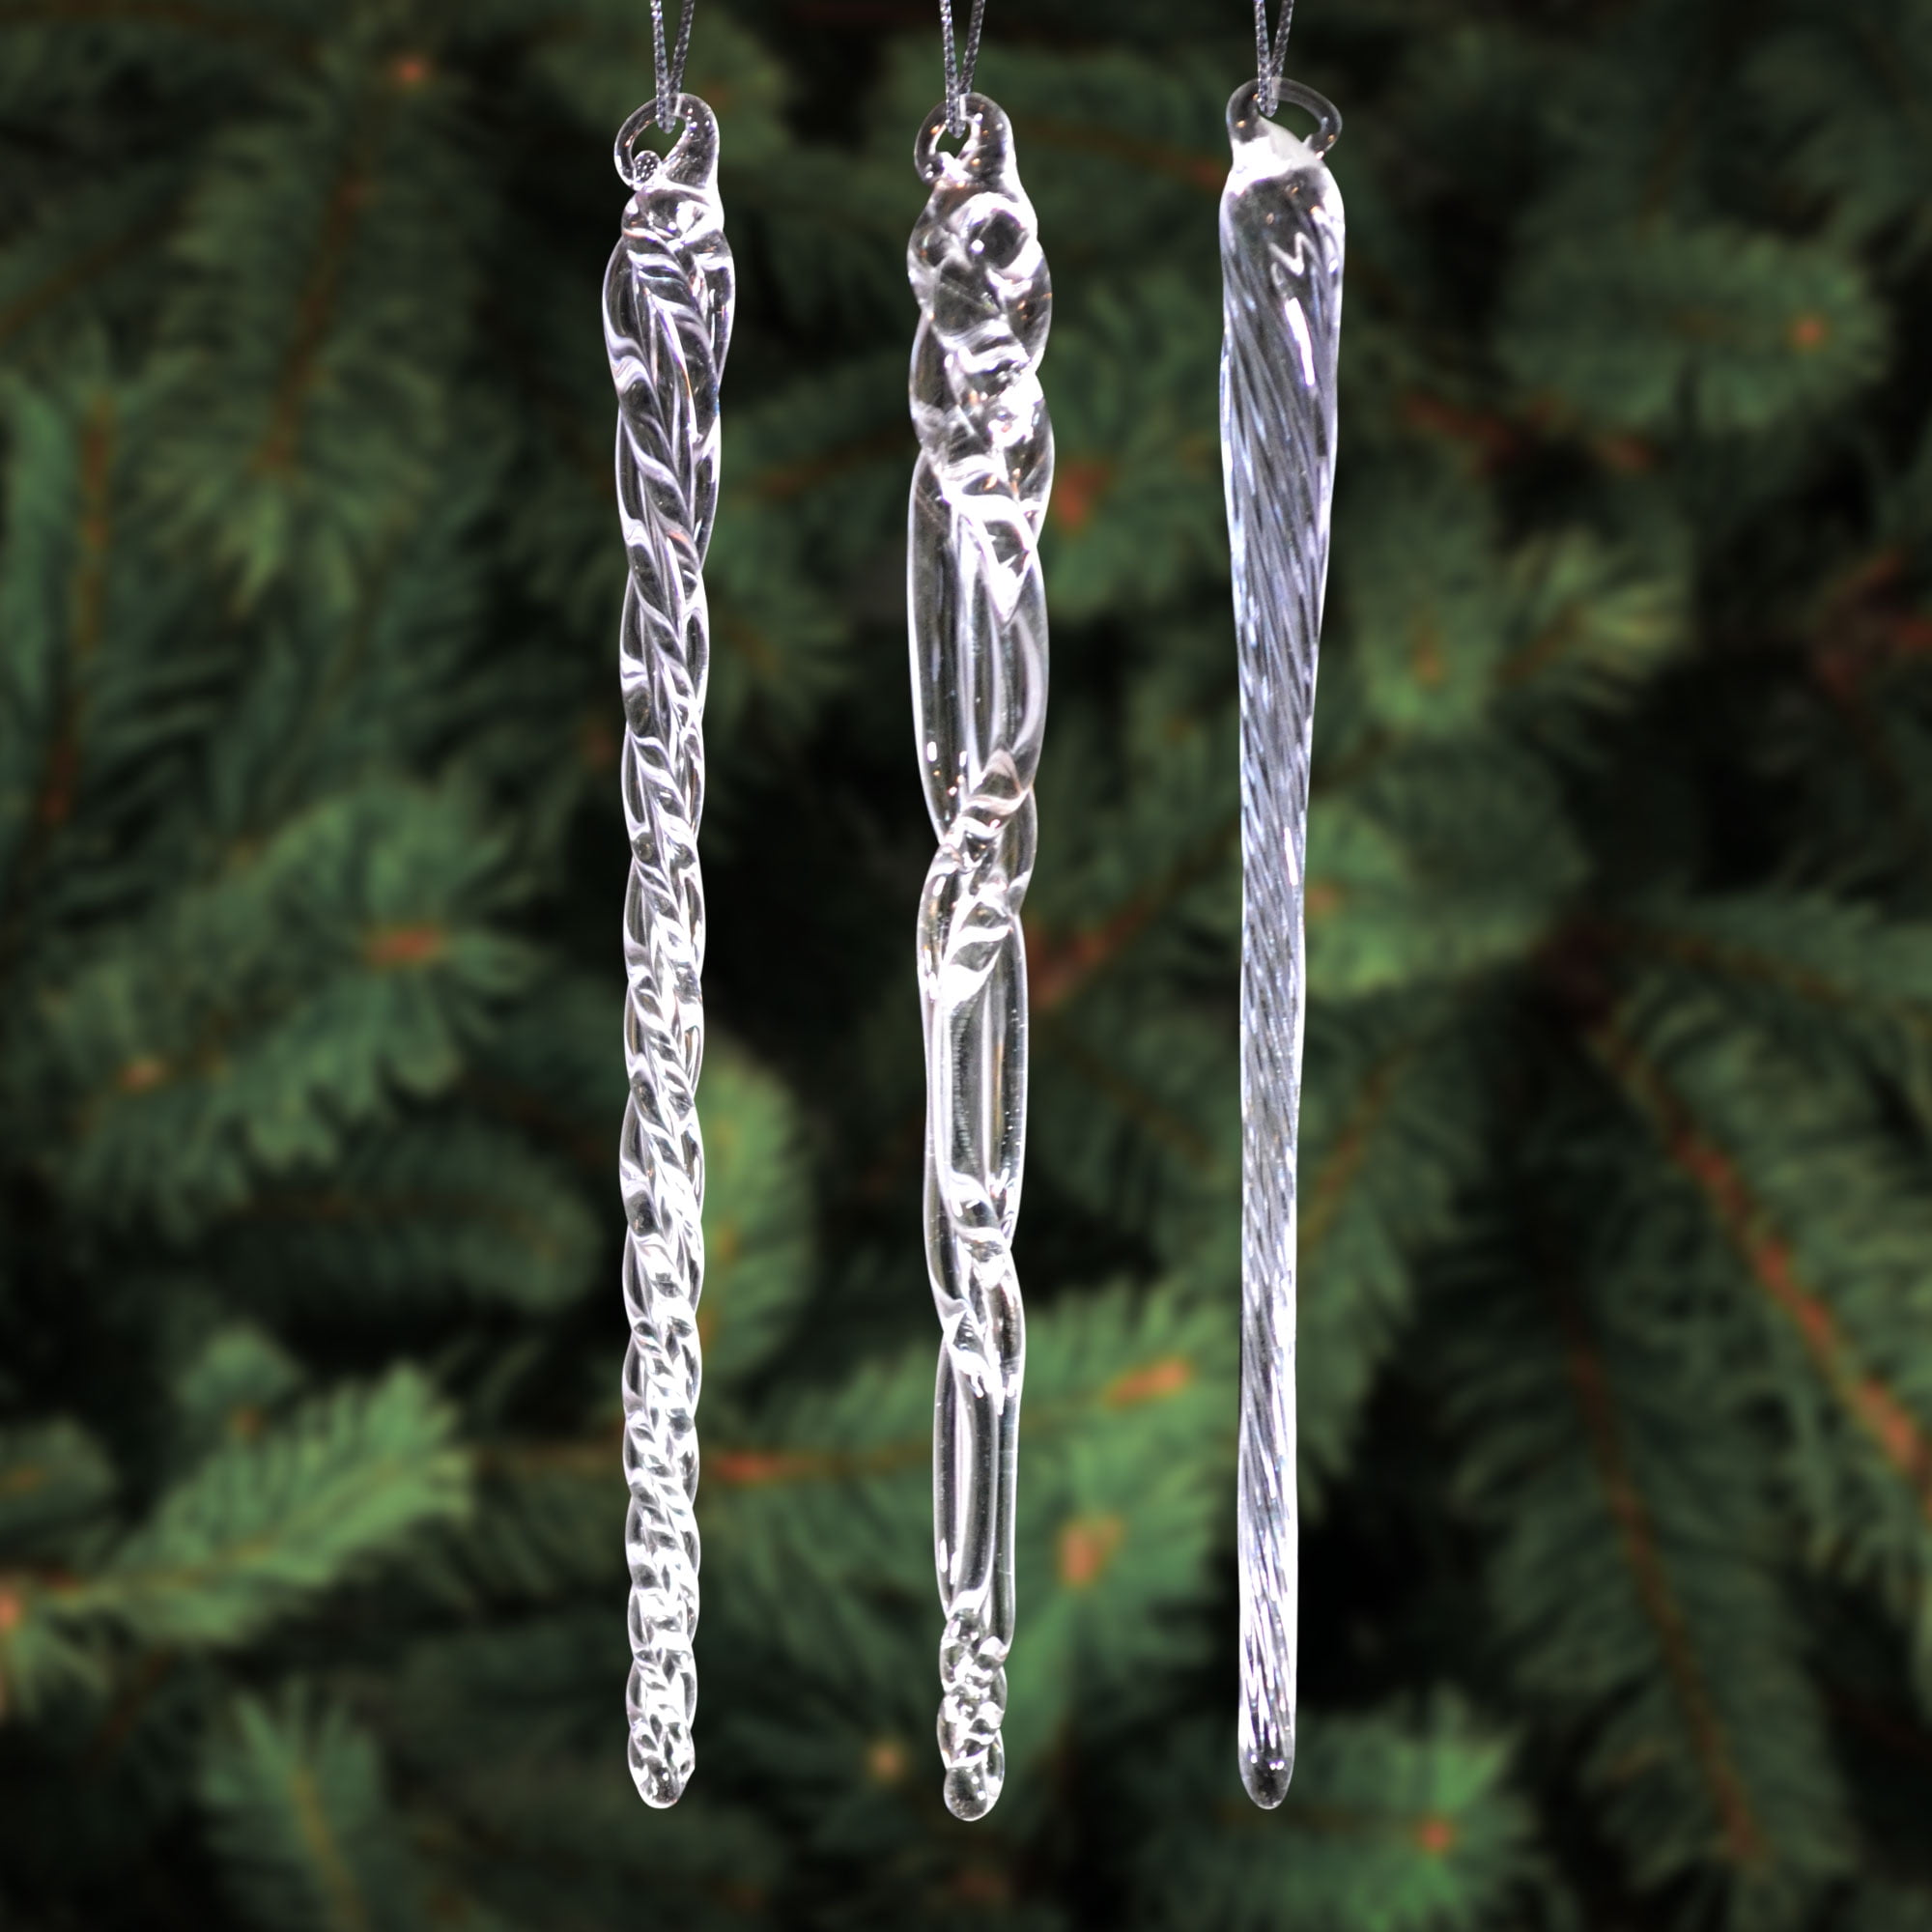 Details about Hobby Lobby 24ct Value Pack Woodland Bronze Icicle Ornaments ...